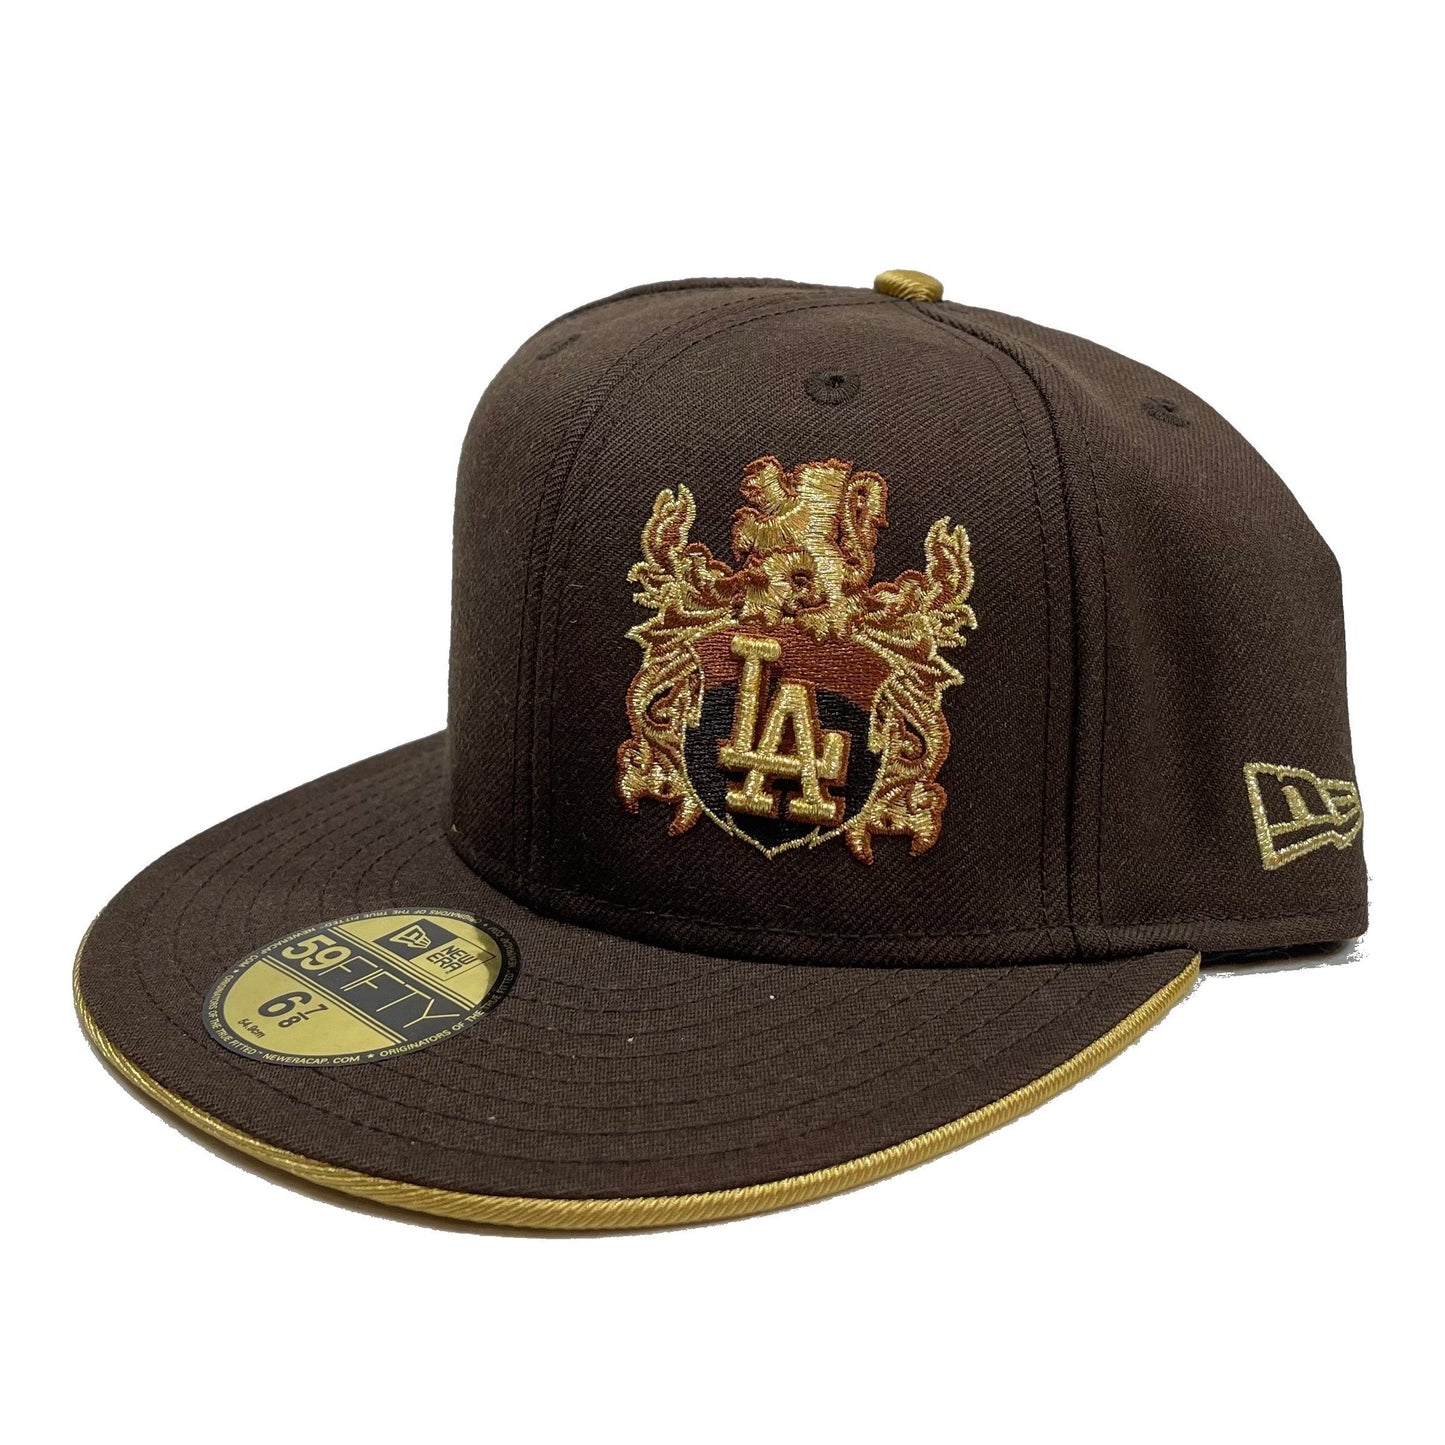 Los Angeles Dodgers Retro-Vintage (Brown/Gold) Fitted